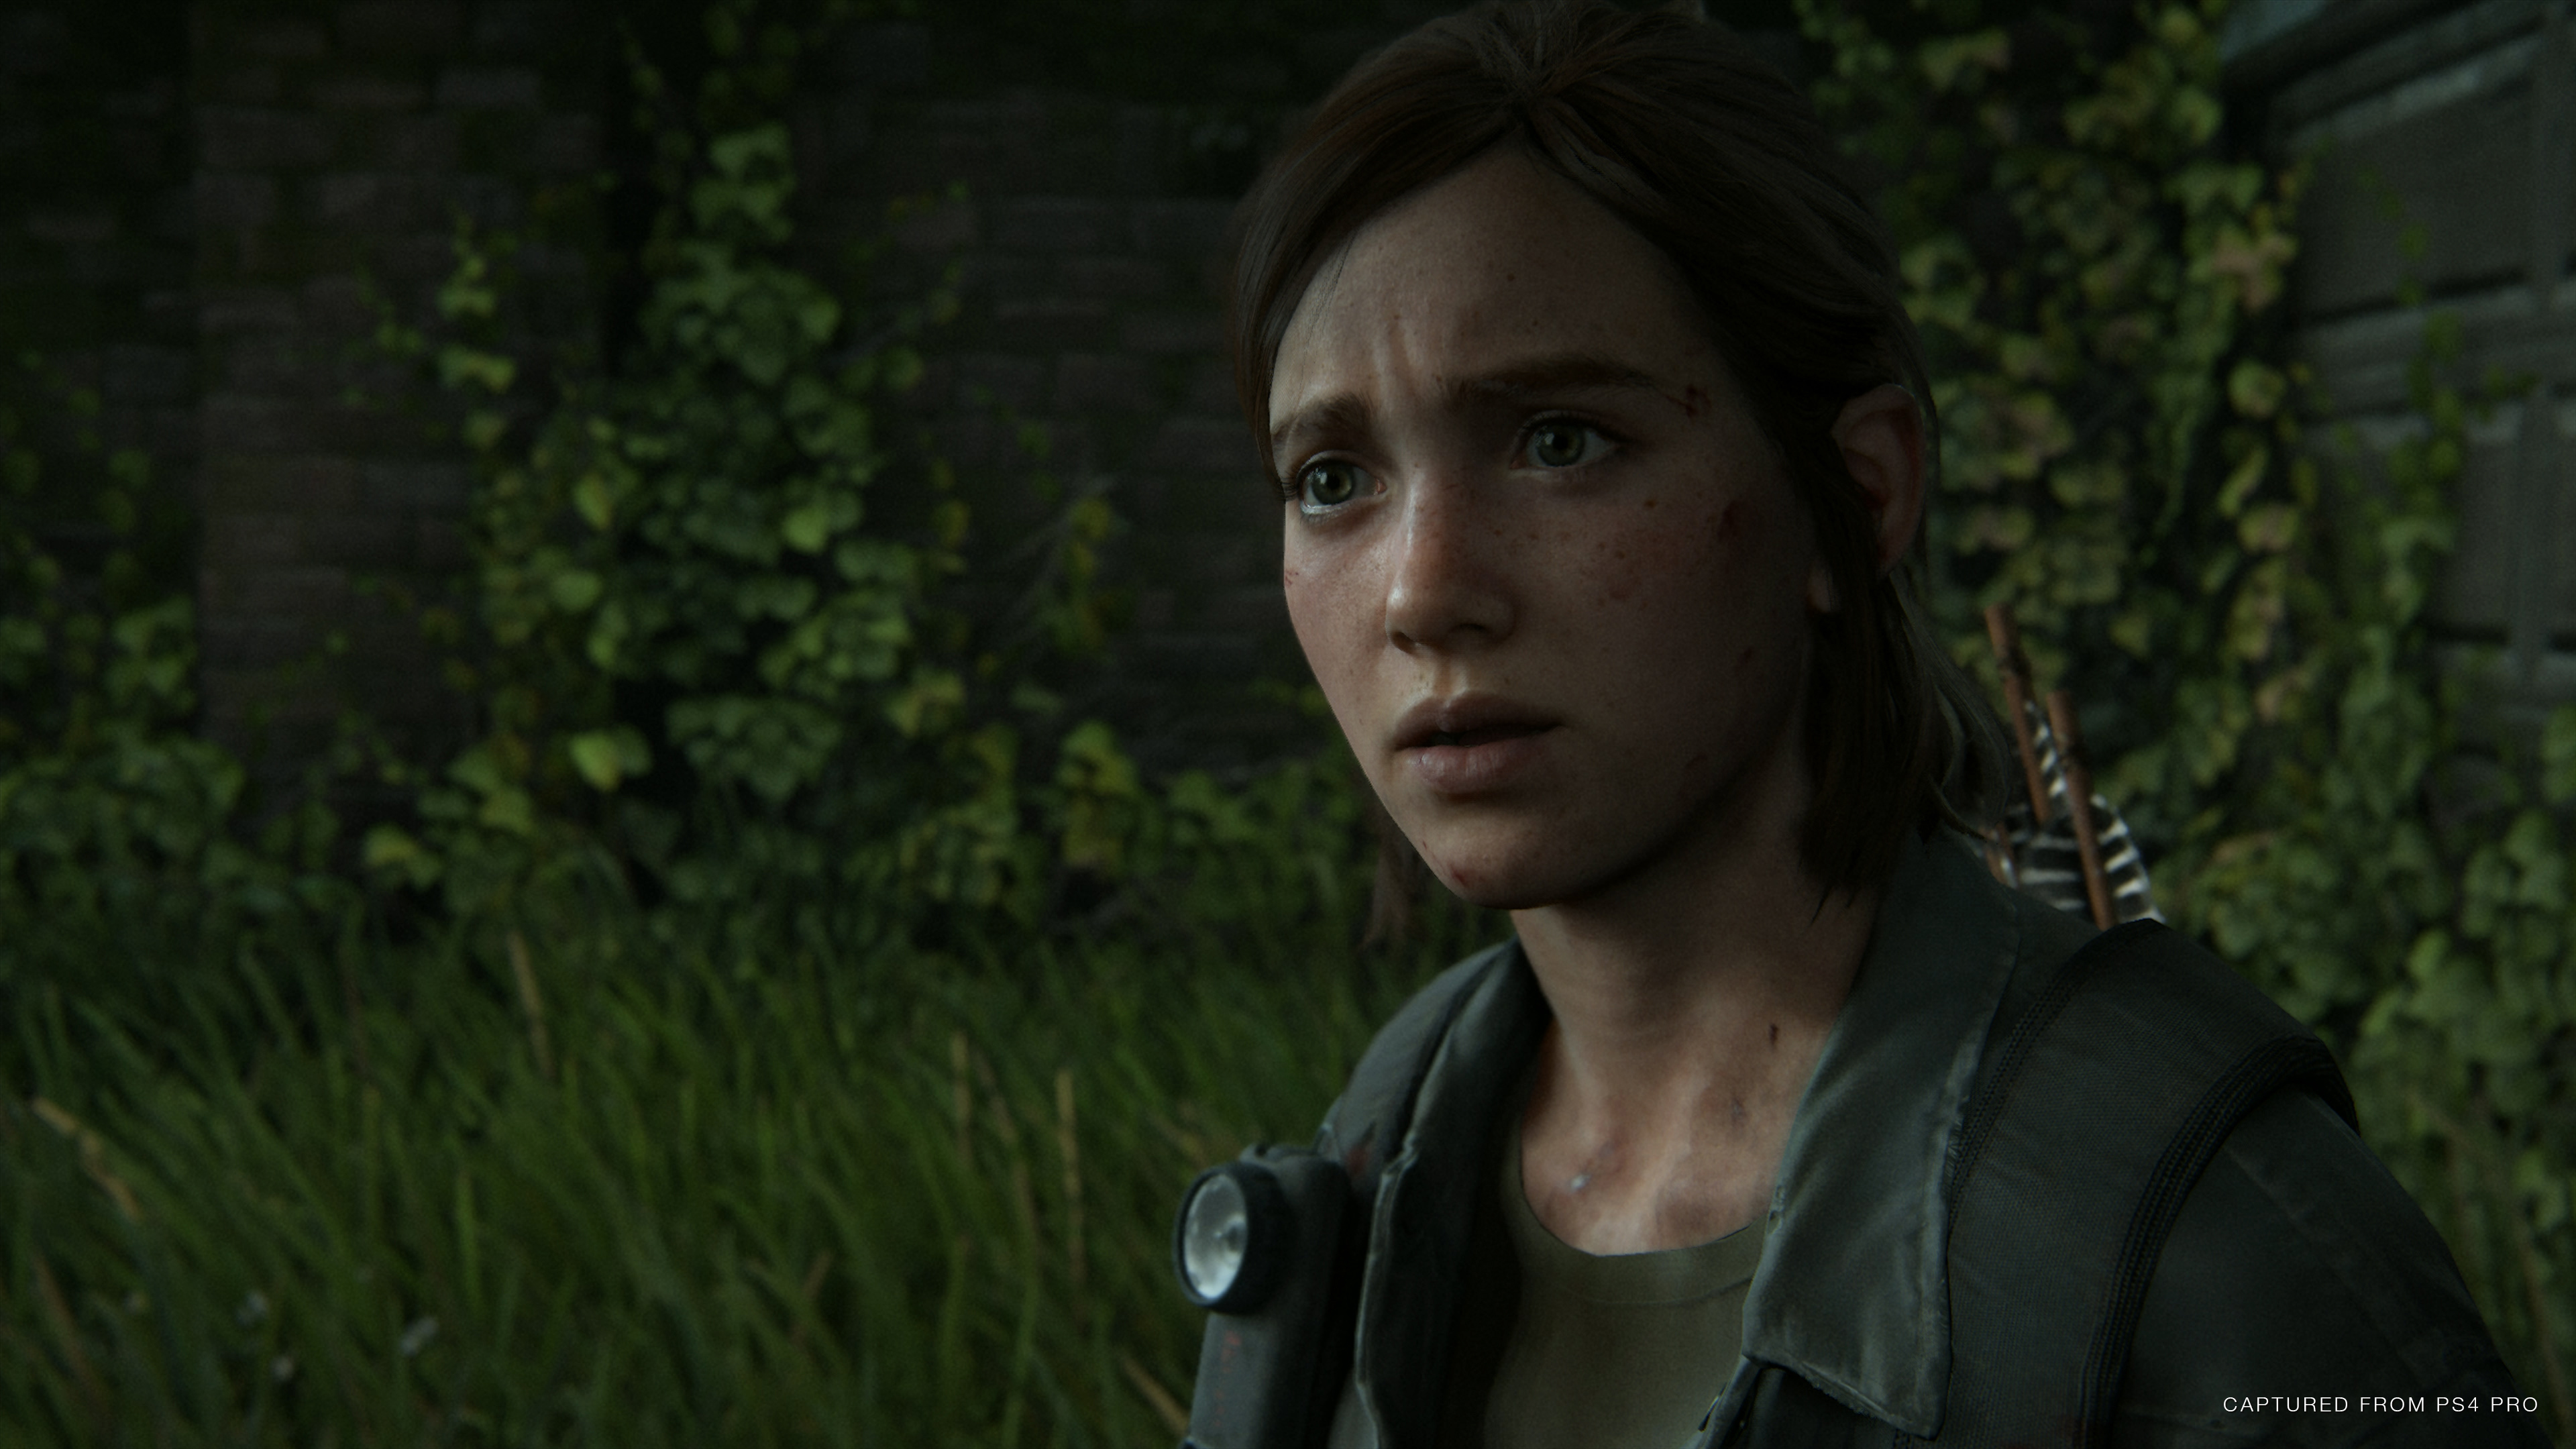 The Last of Us Part II Review: A Dark Masterpiece